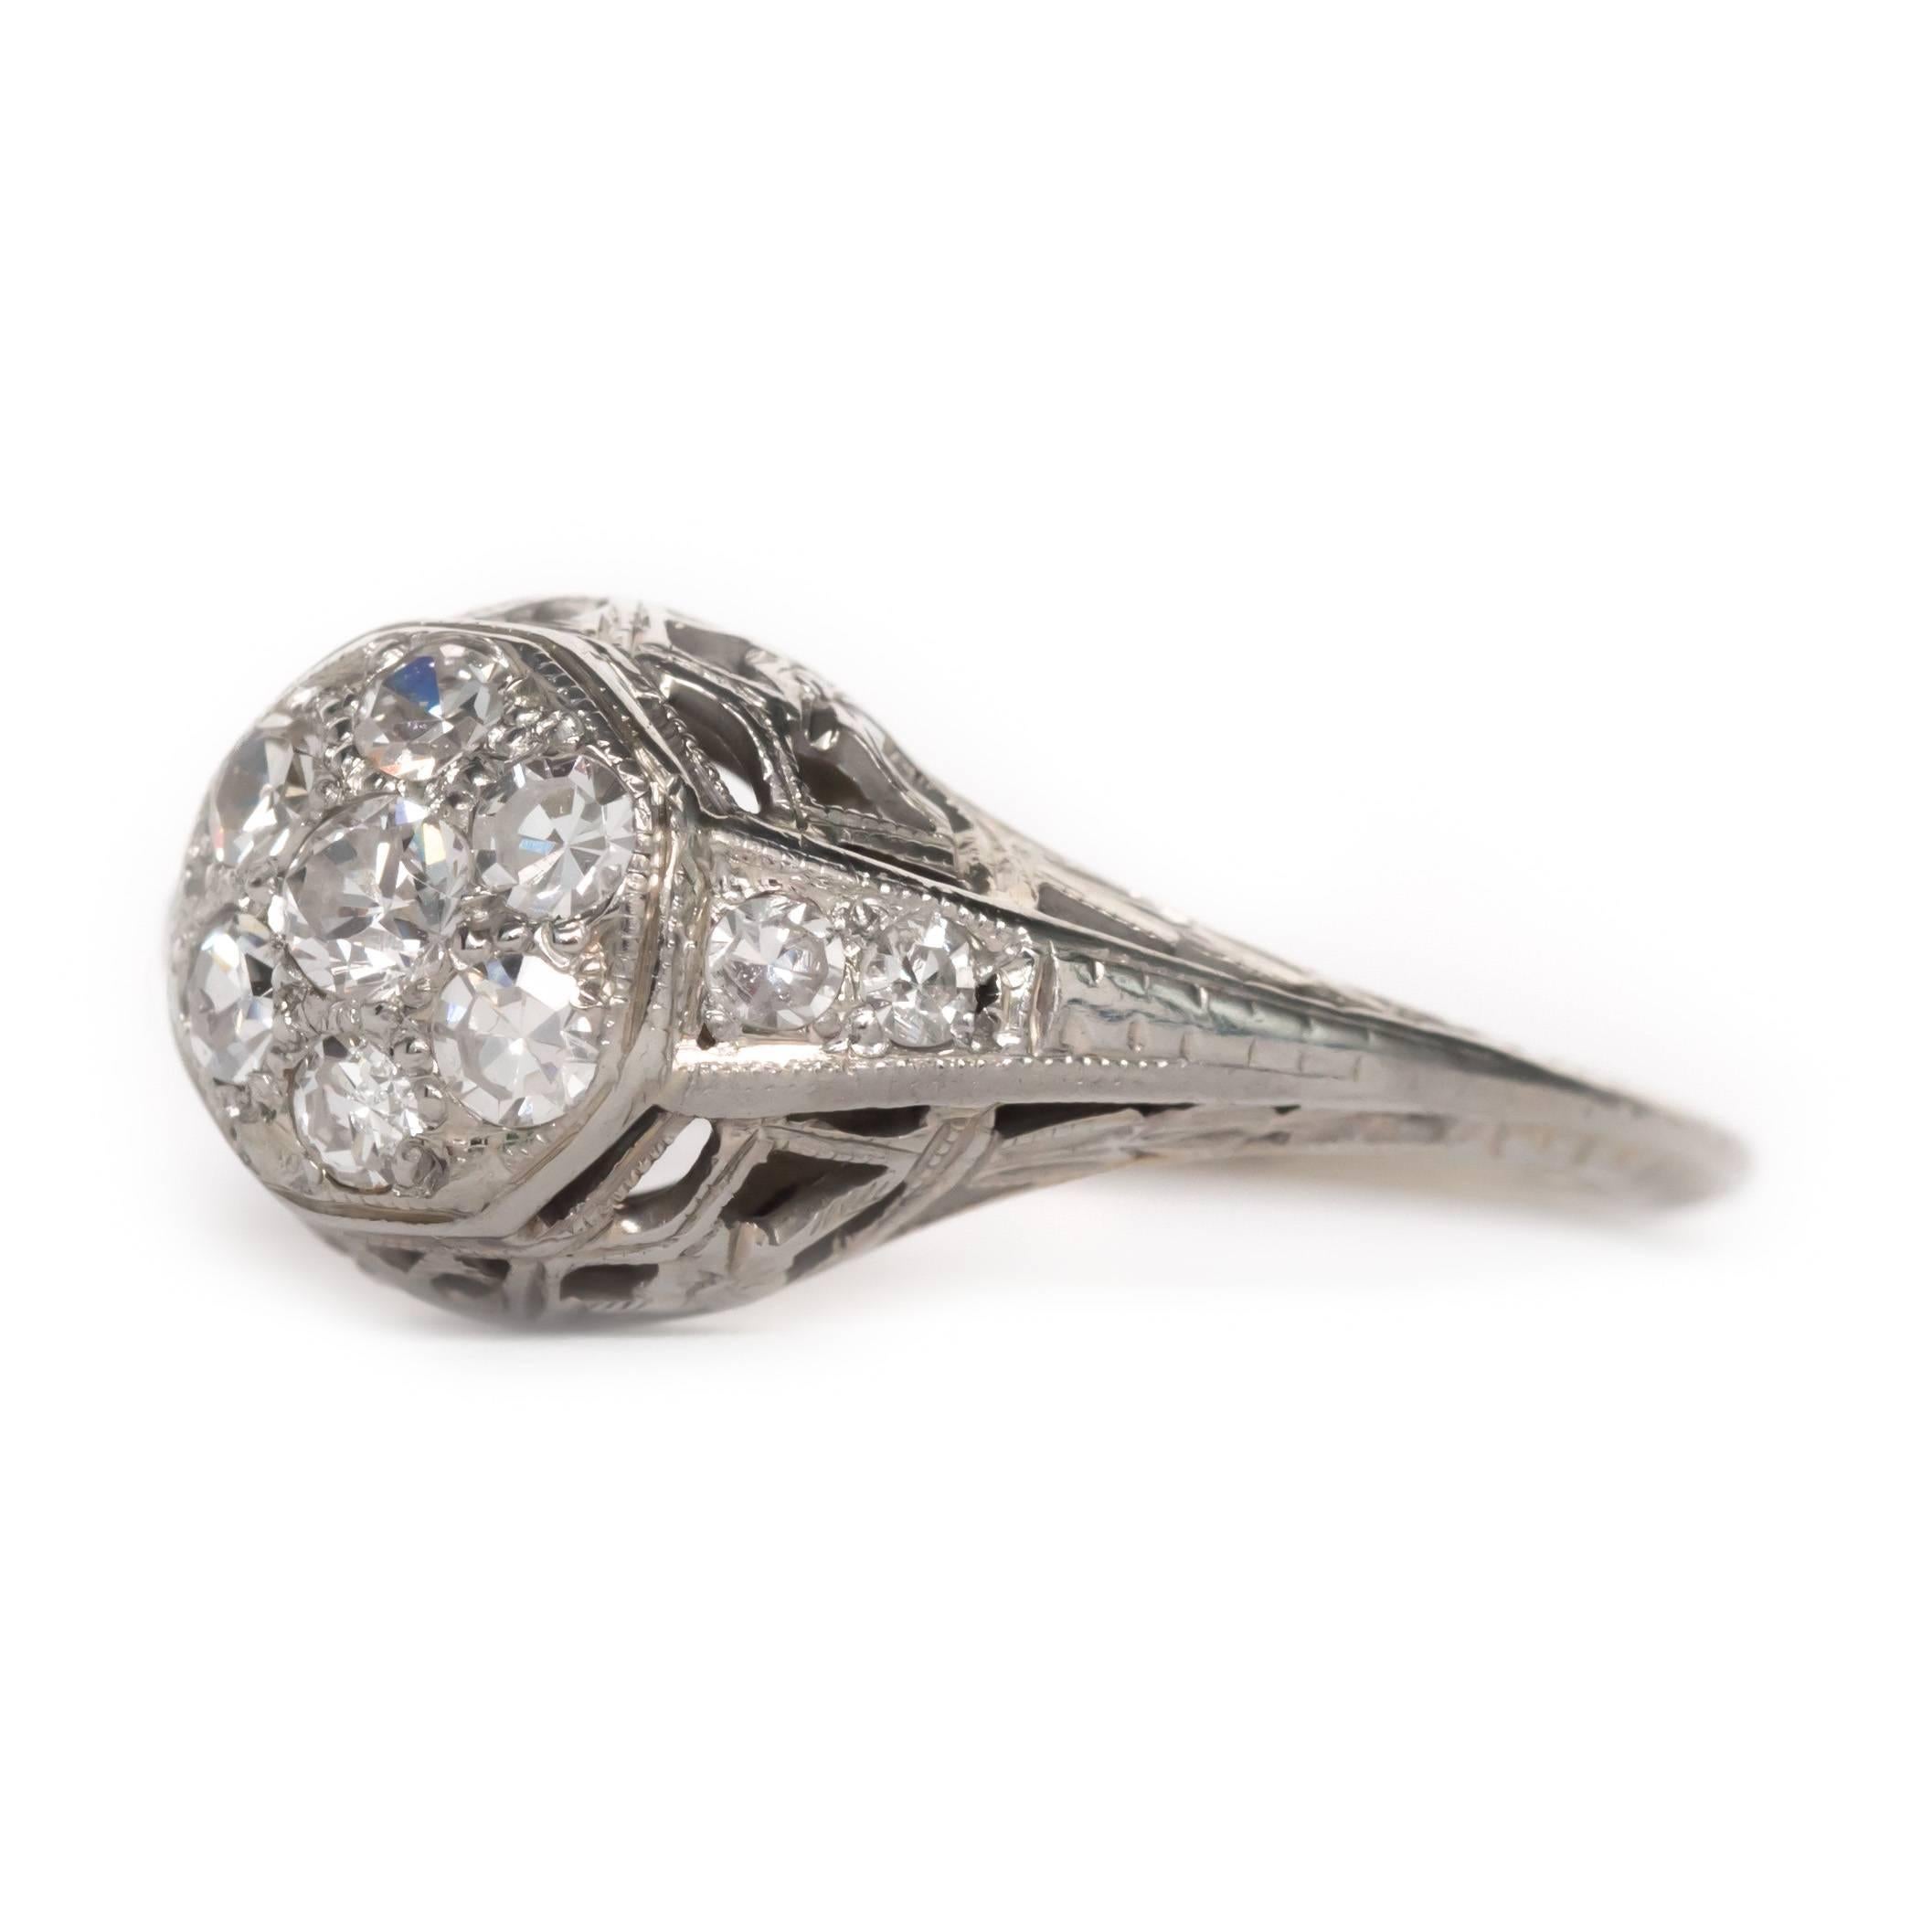 Item Details: 
Ring Size: Approximately 6.20
Metal Type: 18 Karat White Gold
Weight: 2.9 grams

Center Diamond Details:
Shape: Antique European Cut
Carat Weight: .25 carat, total weight
Color: F
Clarity: VS


Finger to Top of Stone Measurement: